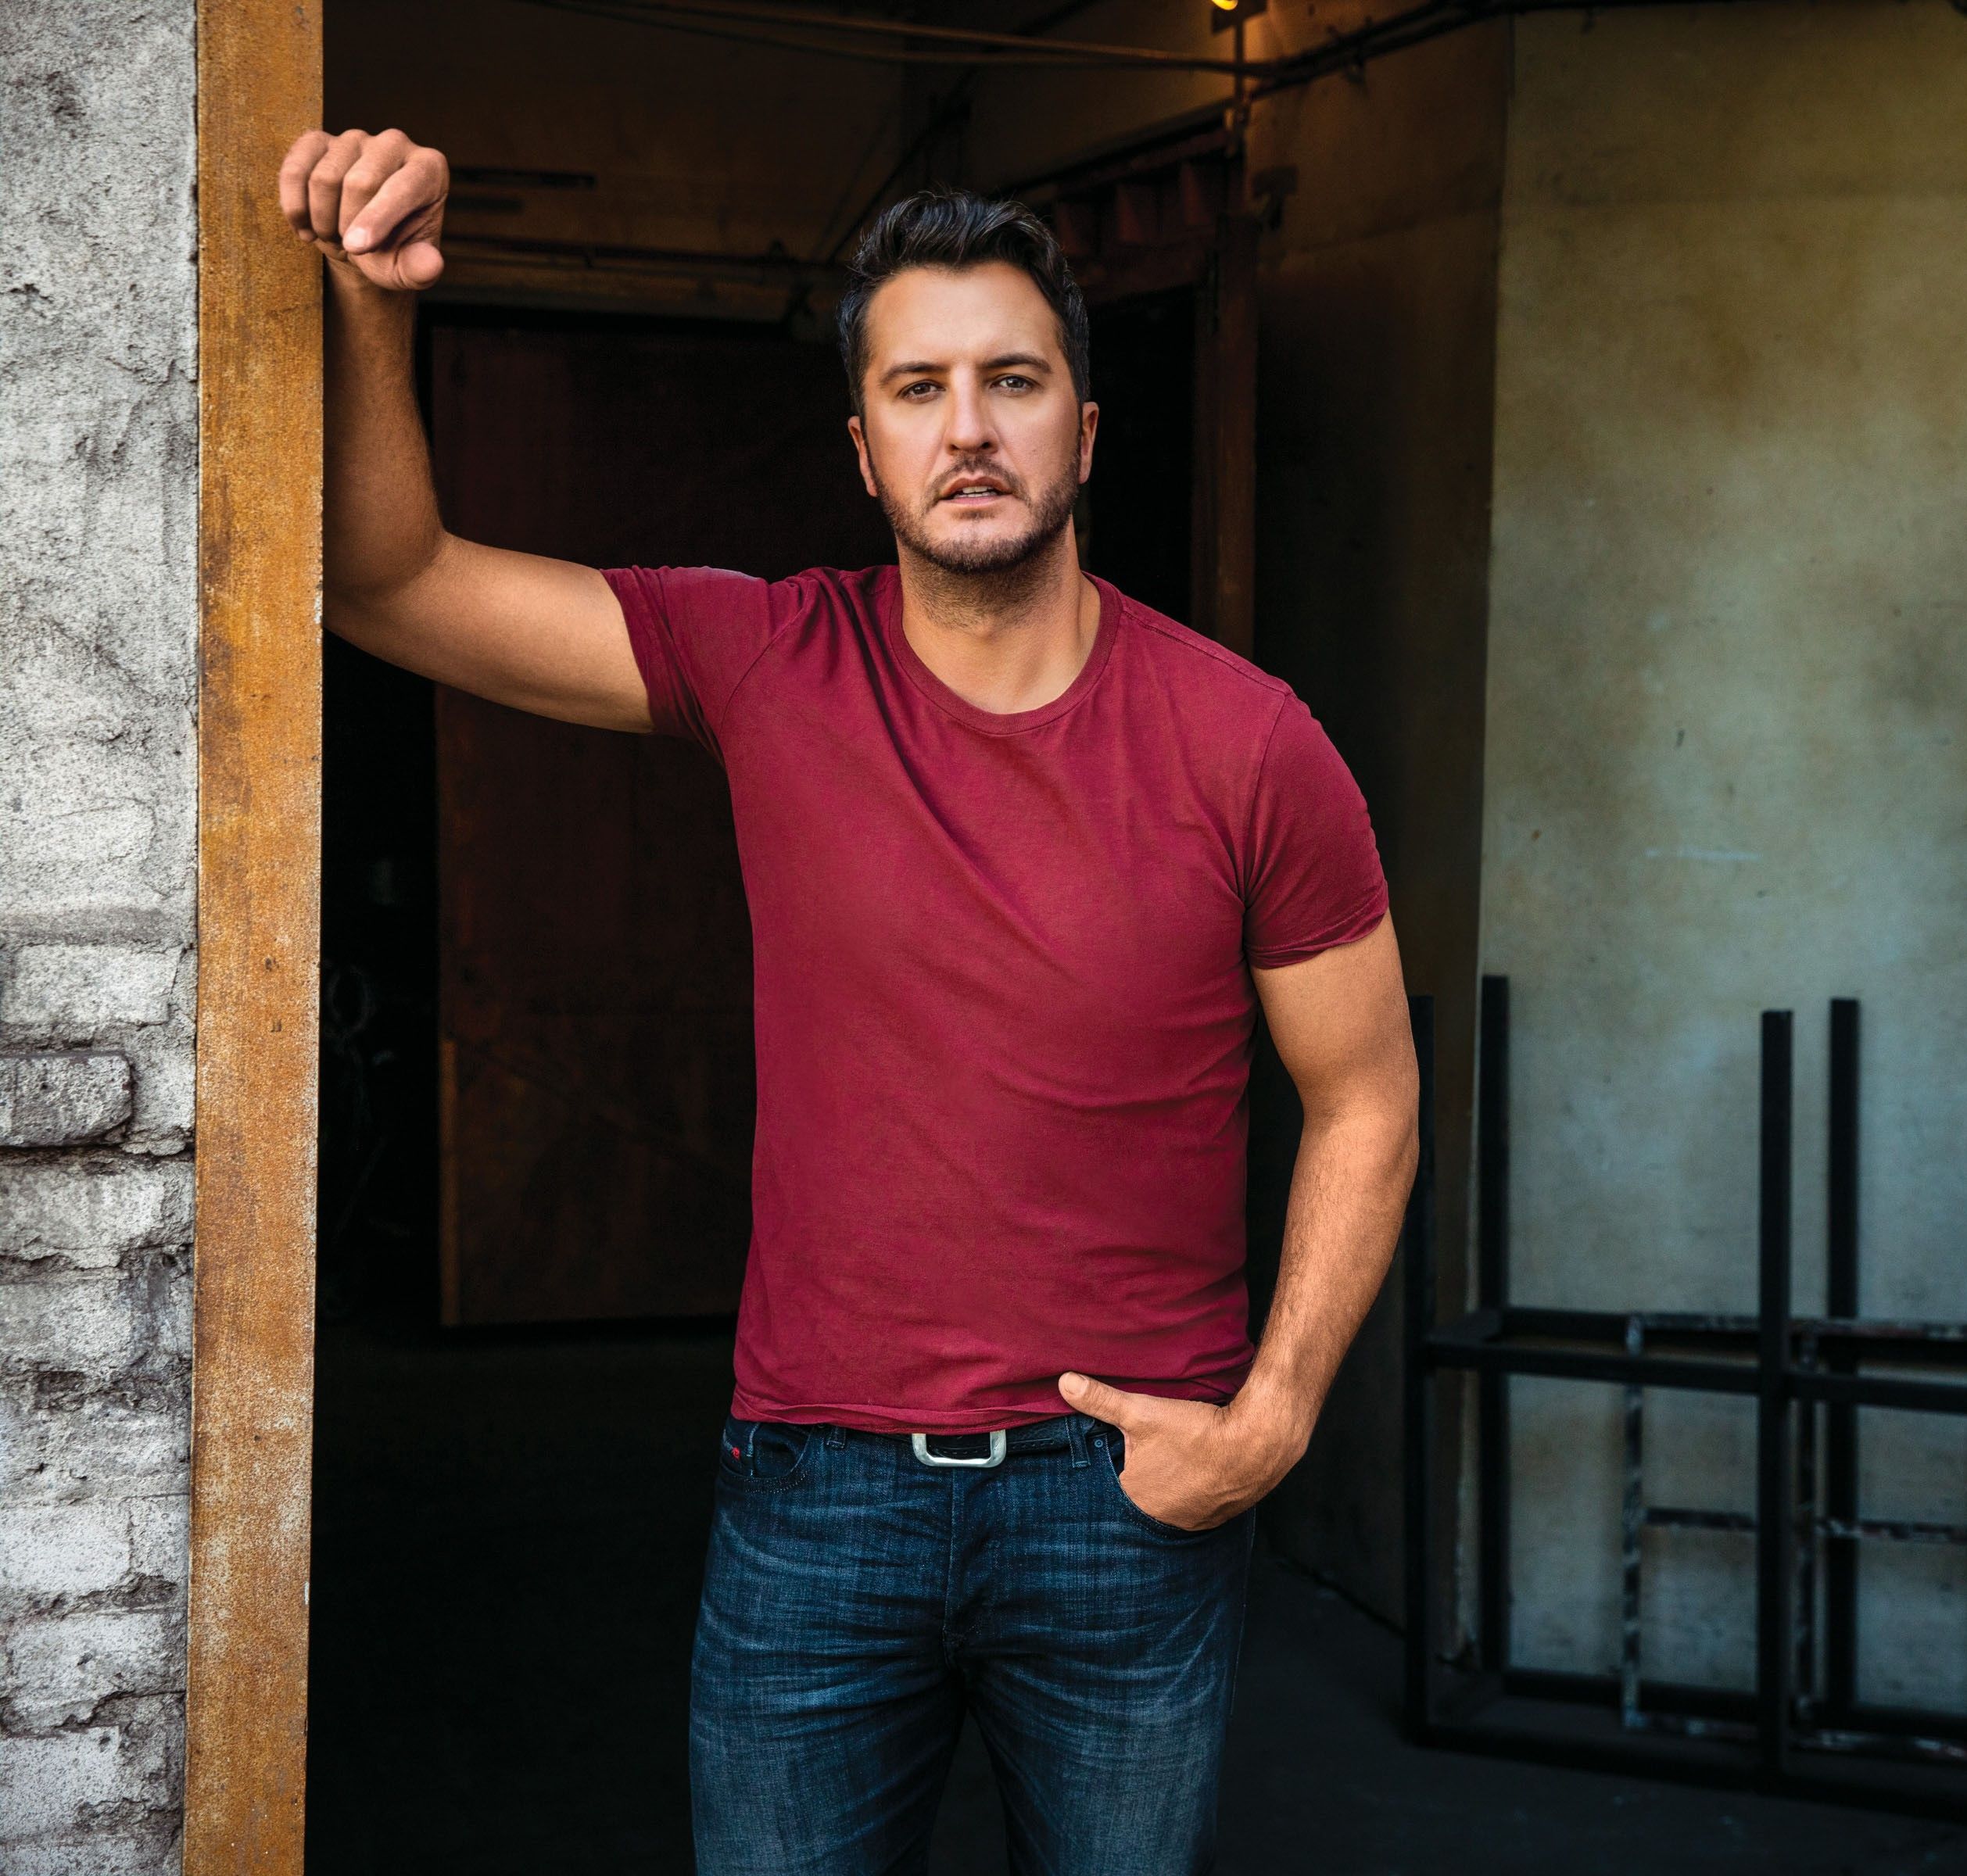 Luke Bryan Scores 26th #1 Career Single with “Down To One”